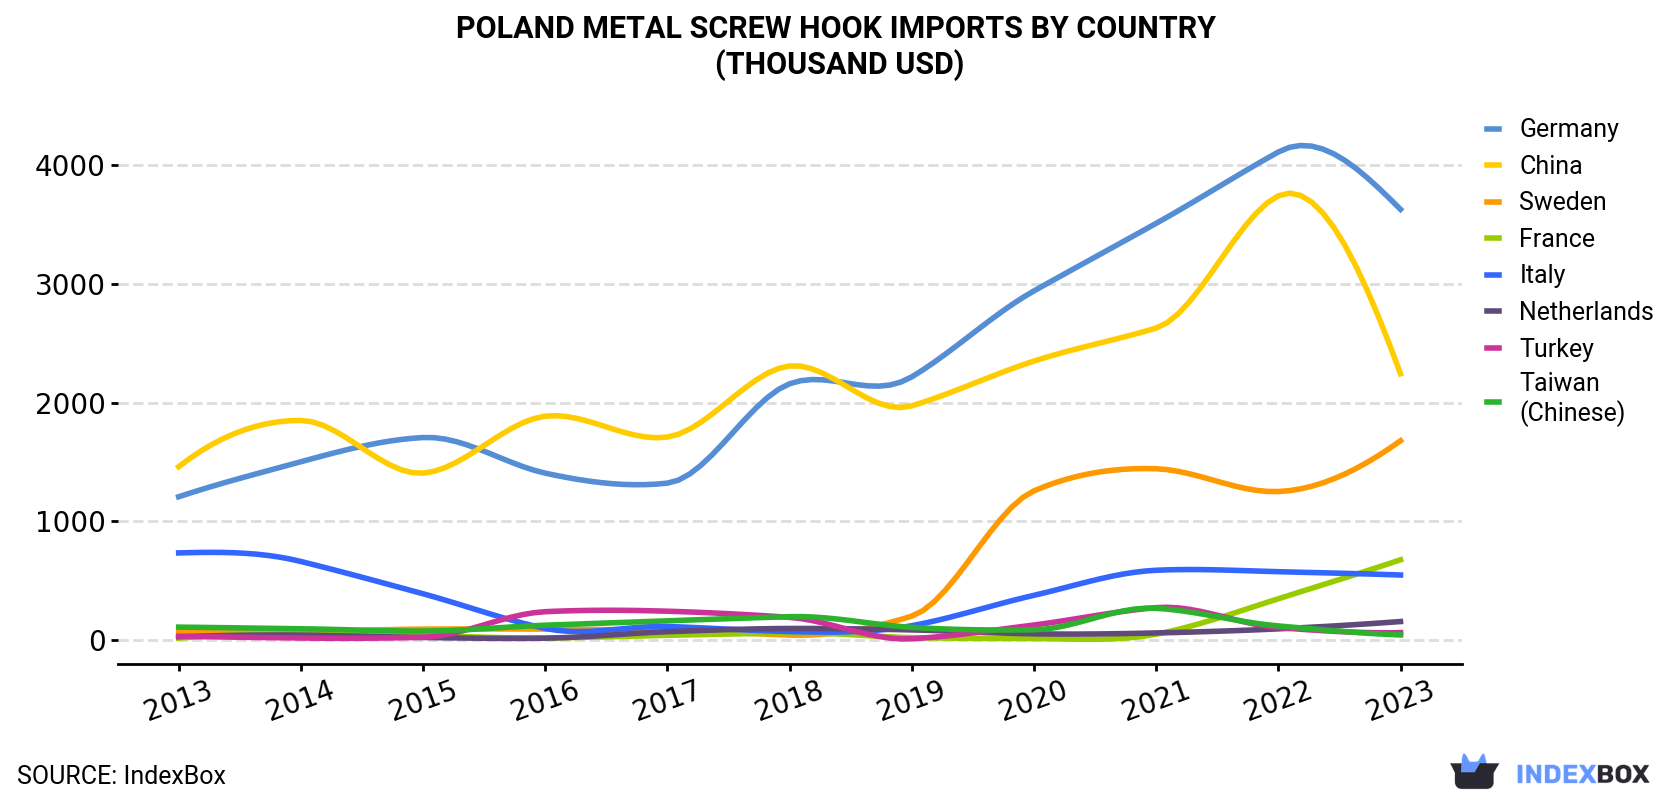 Poland Metal Screw Hook Imports By Country (Thousand USD)